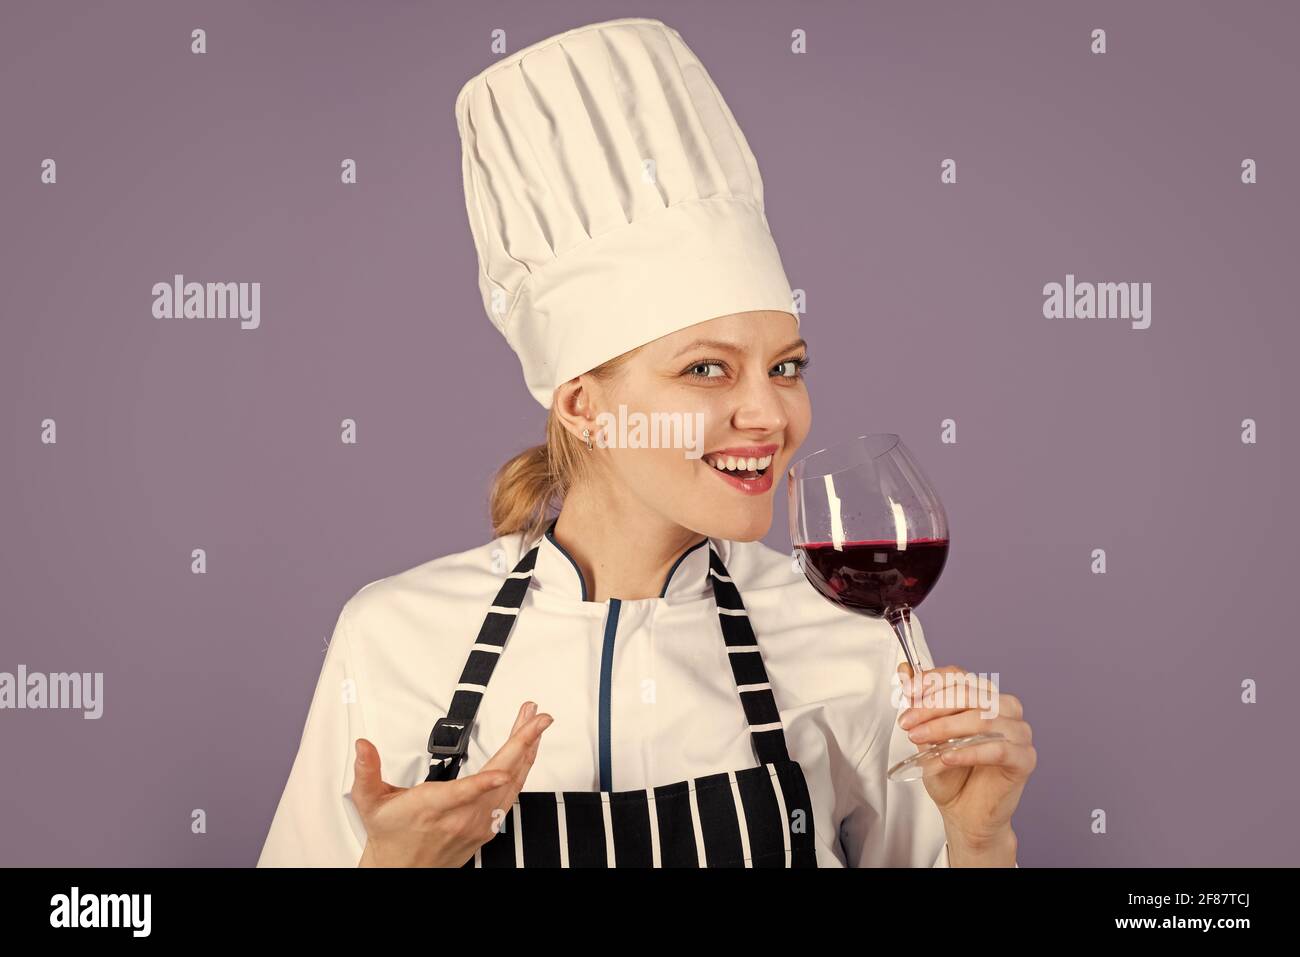 sweet and soft. sommelier with red cabernet or merlot. Restaurant beverage concept. cook degusting wine. woman hold wineglass in restaurant. perfect Stock Photo